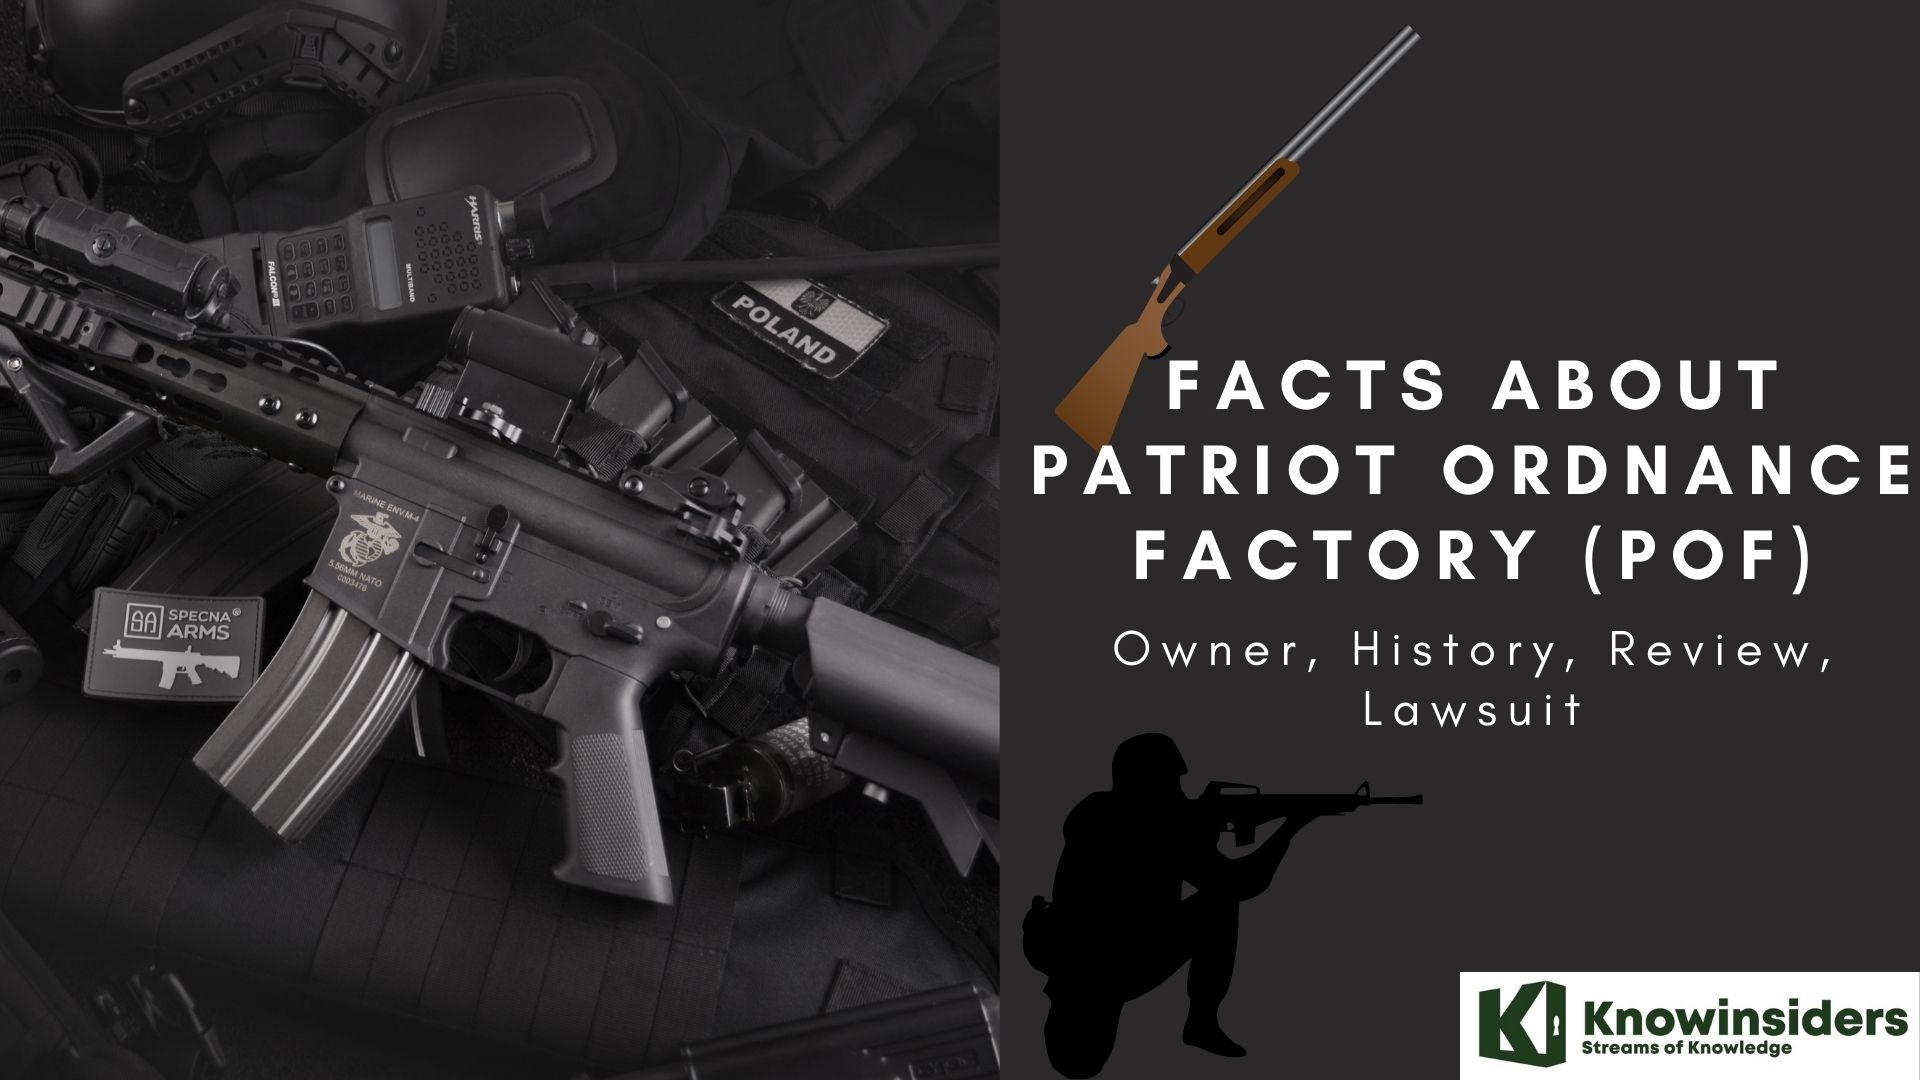 Facts About Patriot Ordnance Factory (POF): Owner, History, Review, Lawsuit